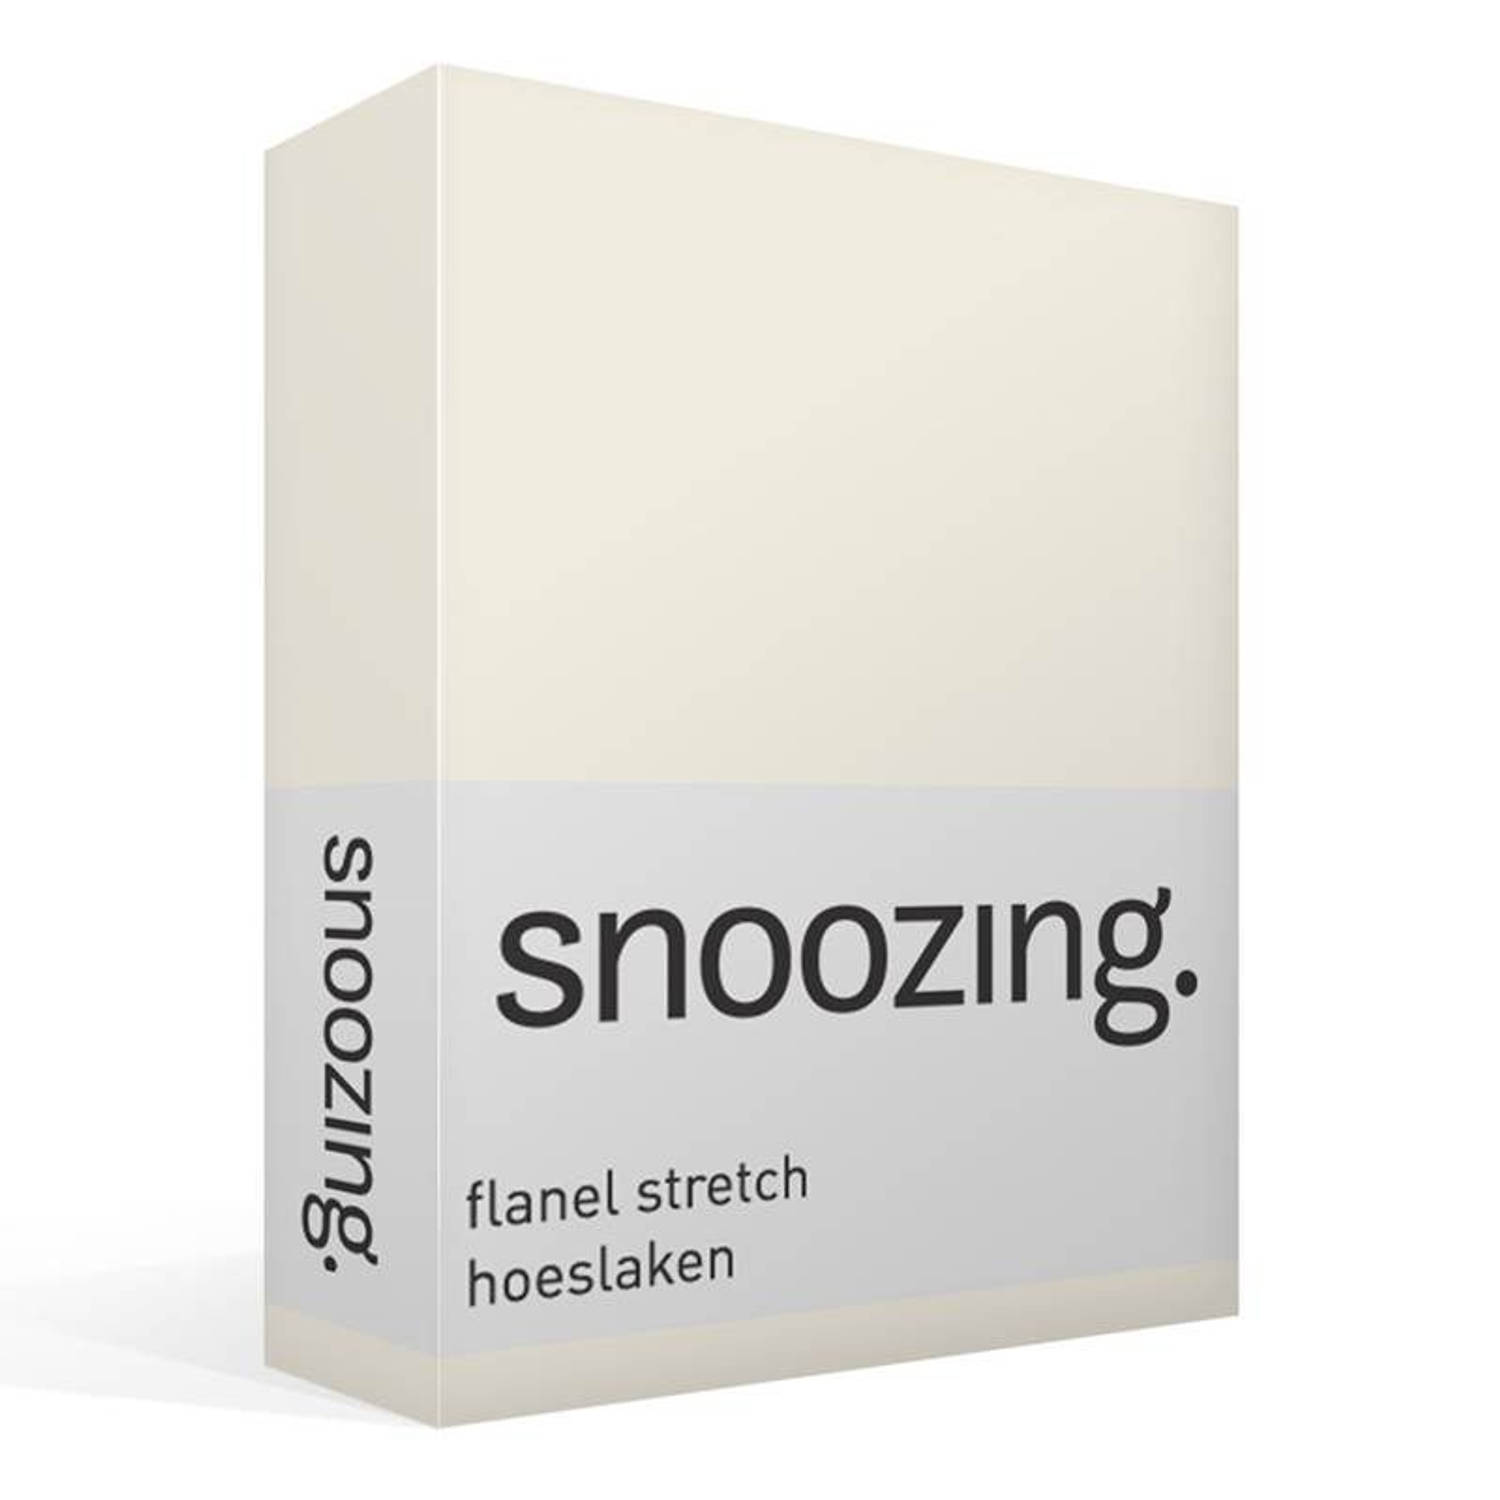 Snoozing stretch flanel hoeslaken - Lits-jumeaux - Ivoor